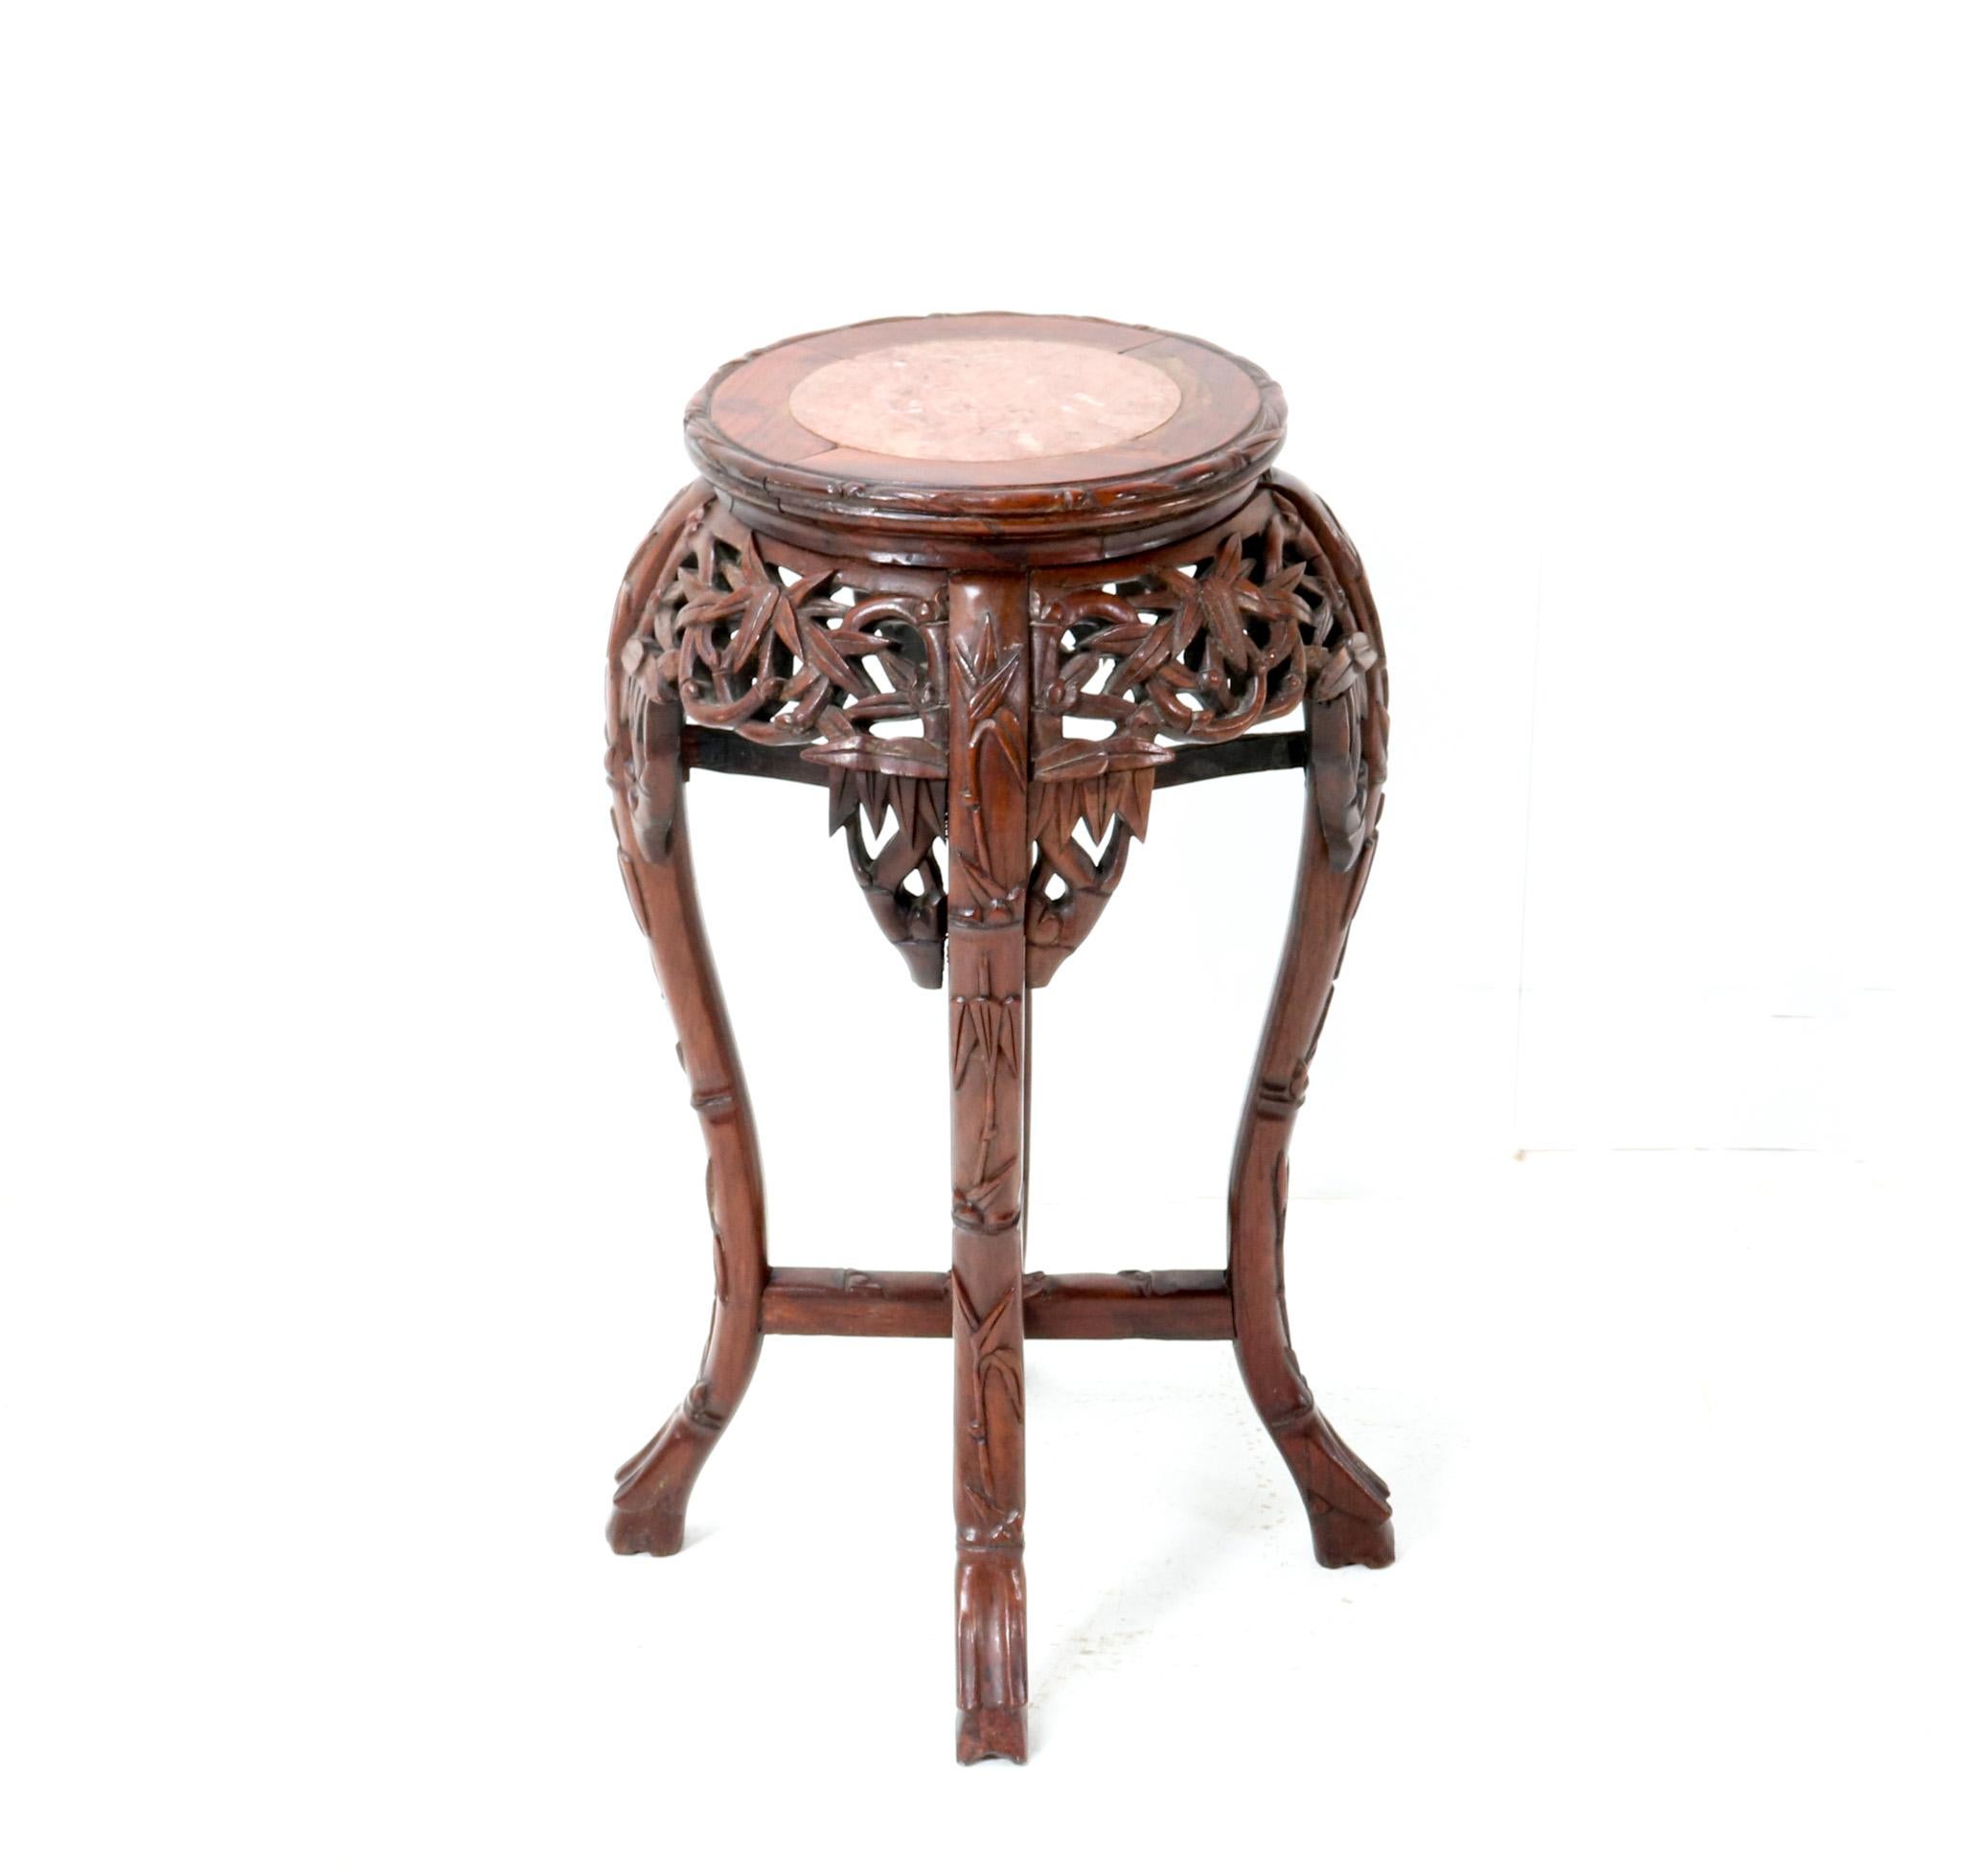 Chinese Export Chinese Hardwood Carved Pedestal Table with Marble Inlaid Top, 1920s For Sale